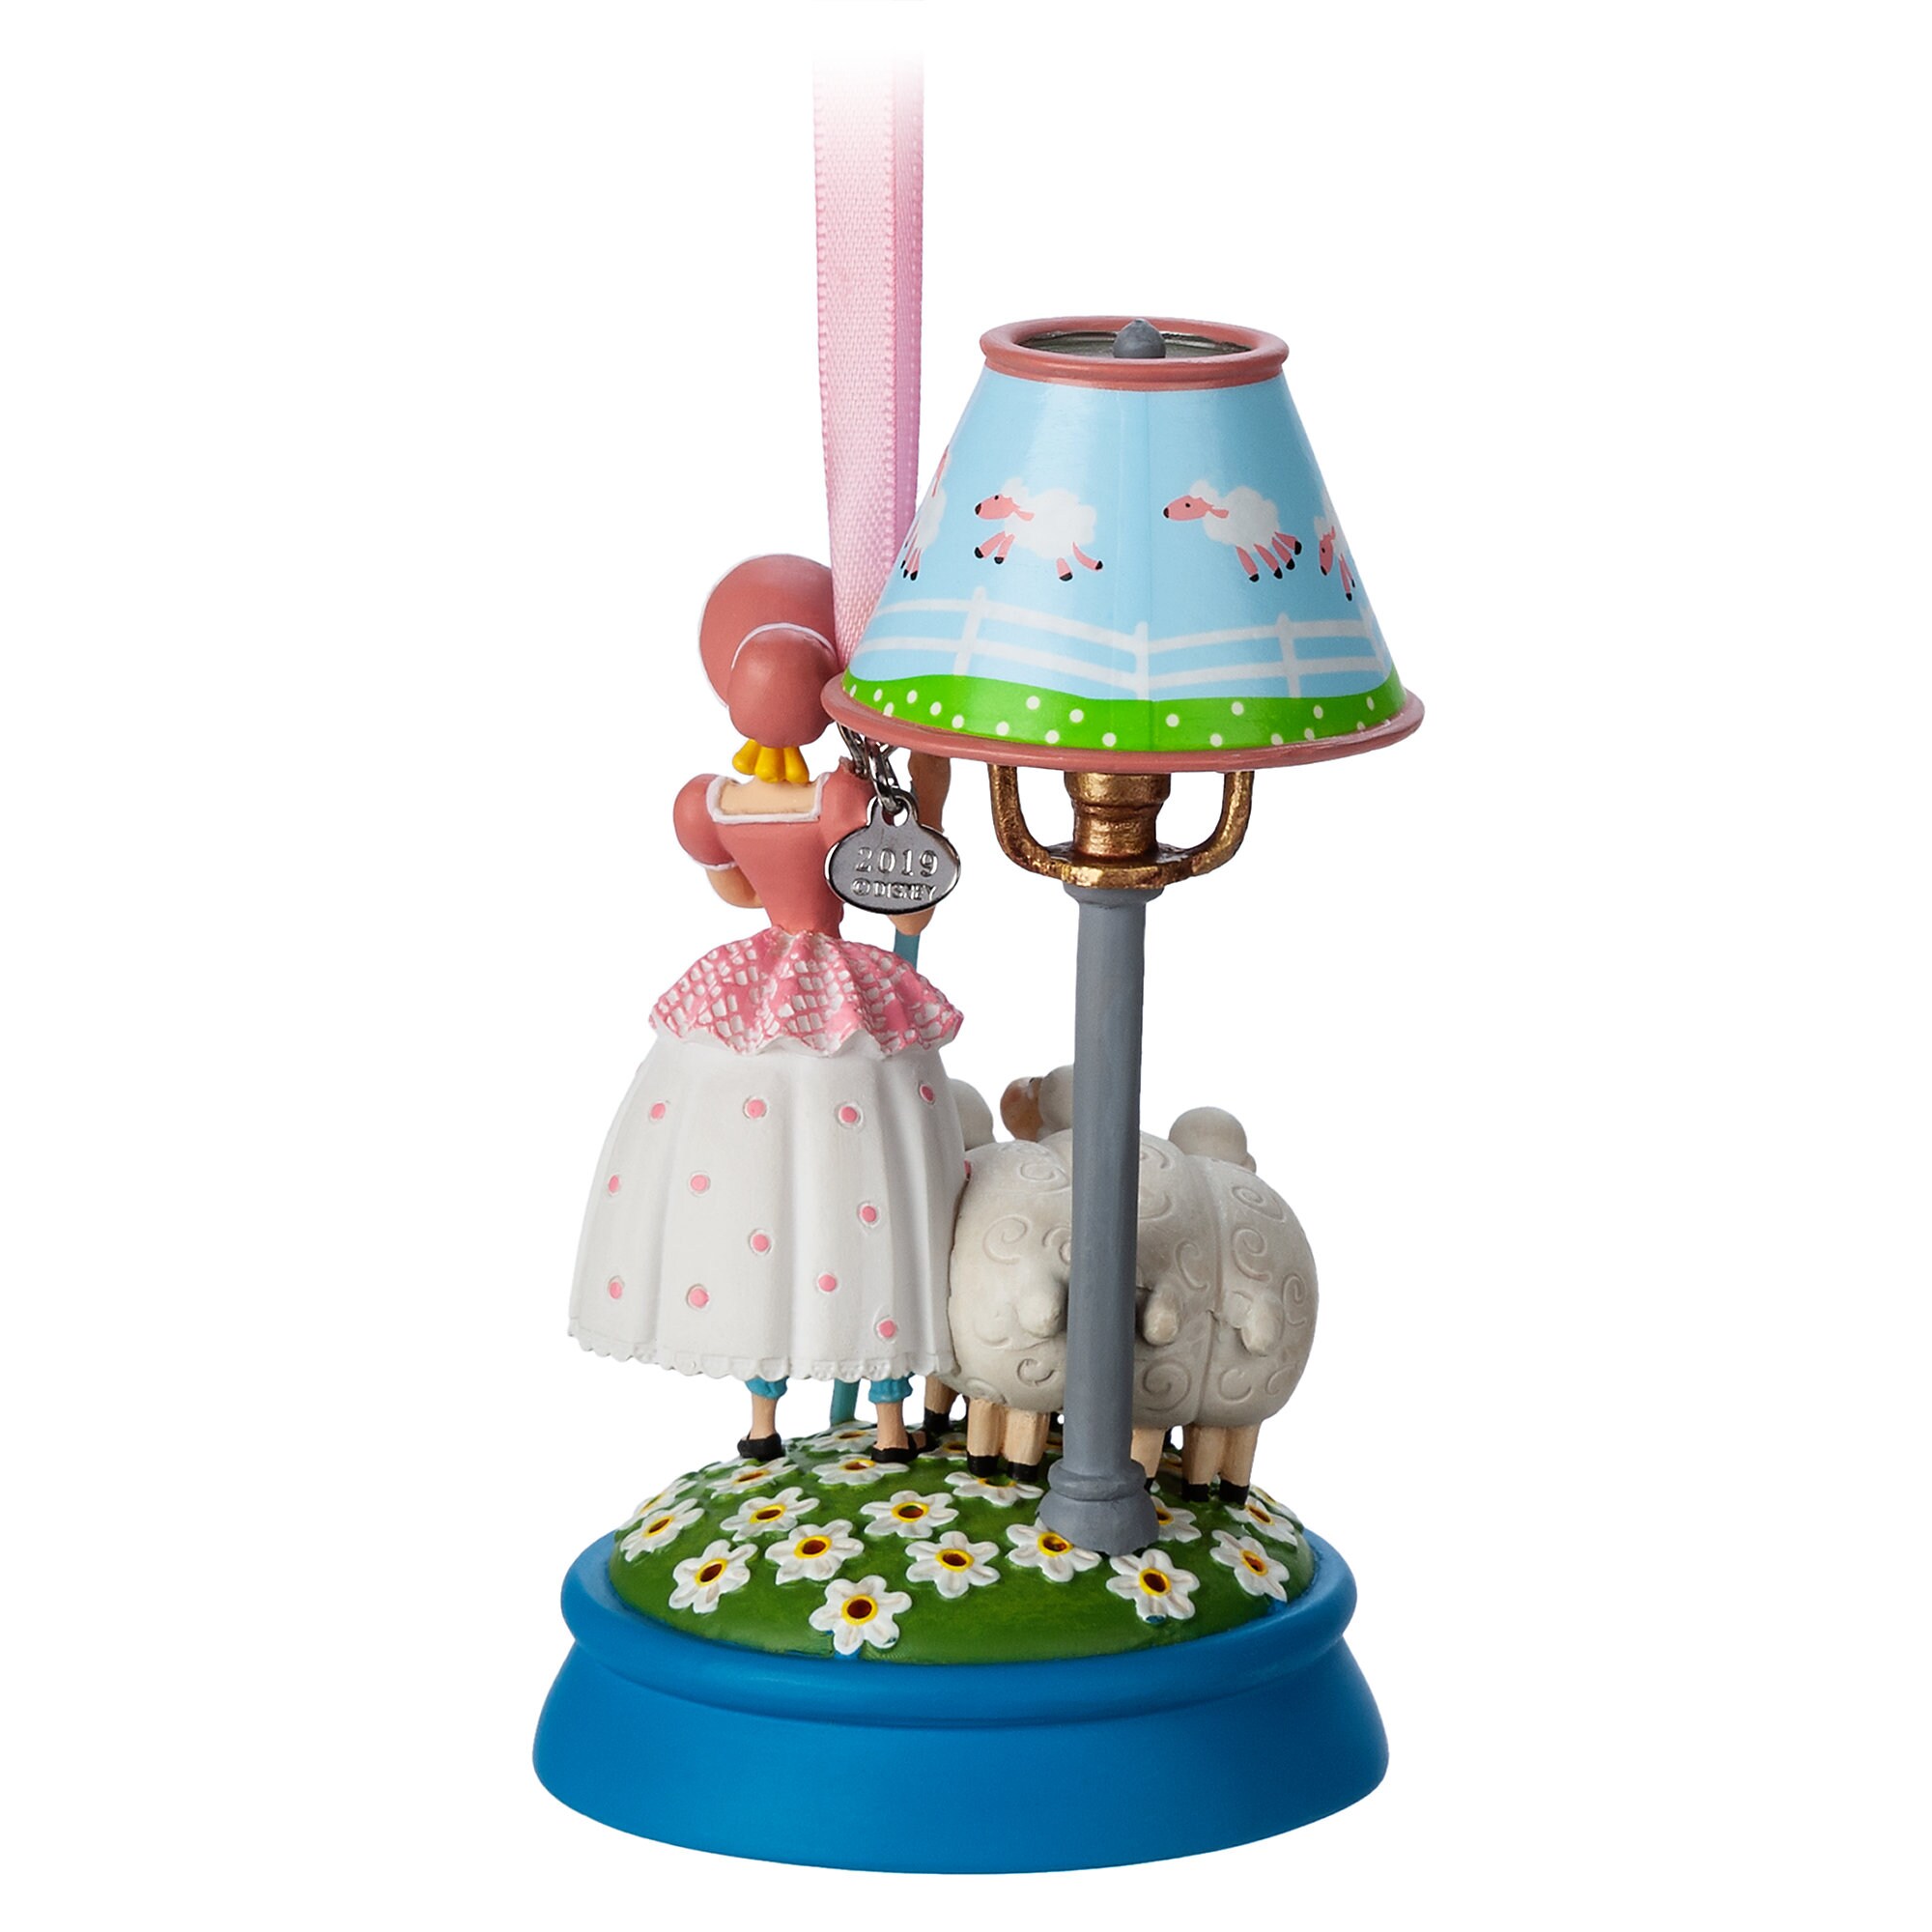 Bo Peep and Sheep Light-Up Sketchbook Ornament - Toy Story 4